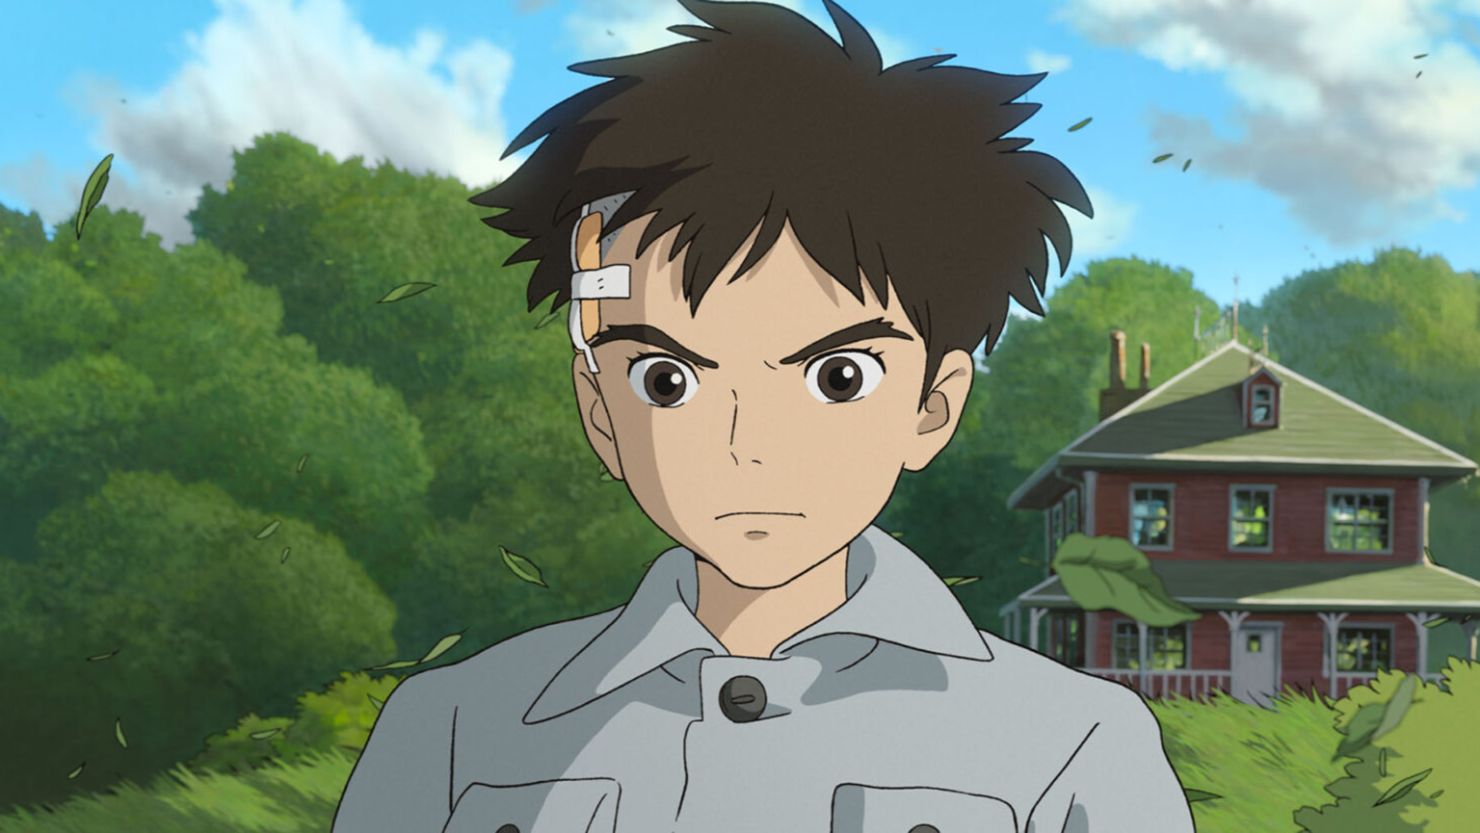 Hayao Miyazaki's "The Boy and the Heron" is his first feature film in 10 years.